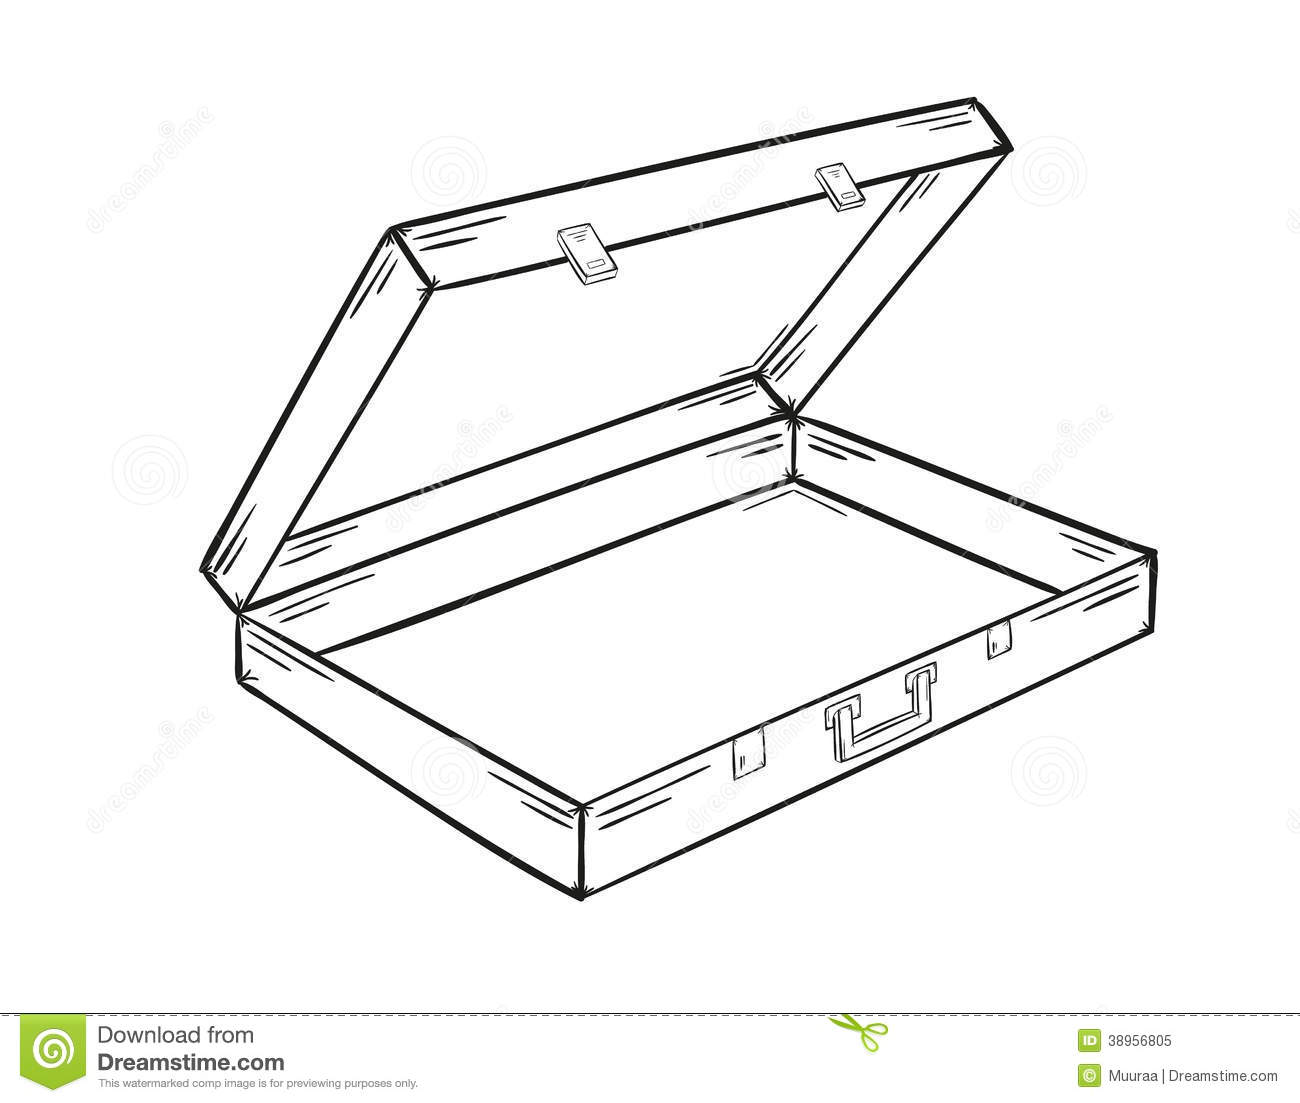 Sketch Of The Open Empty Suitcase On White Background Isolated